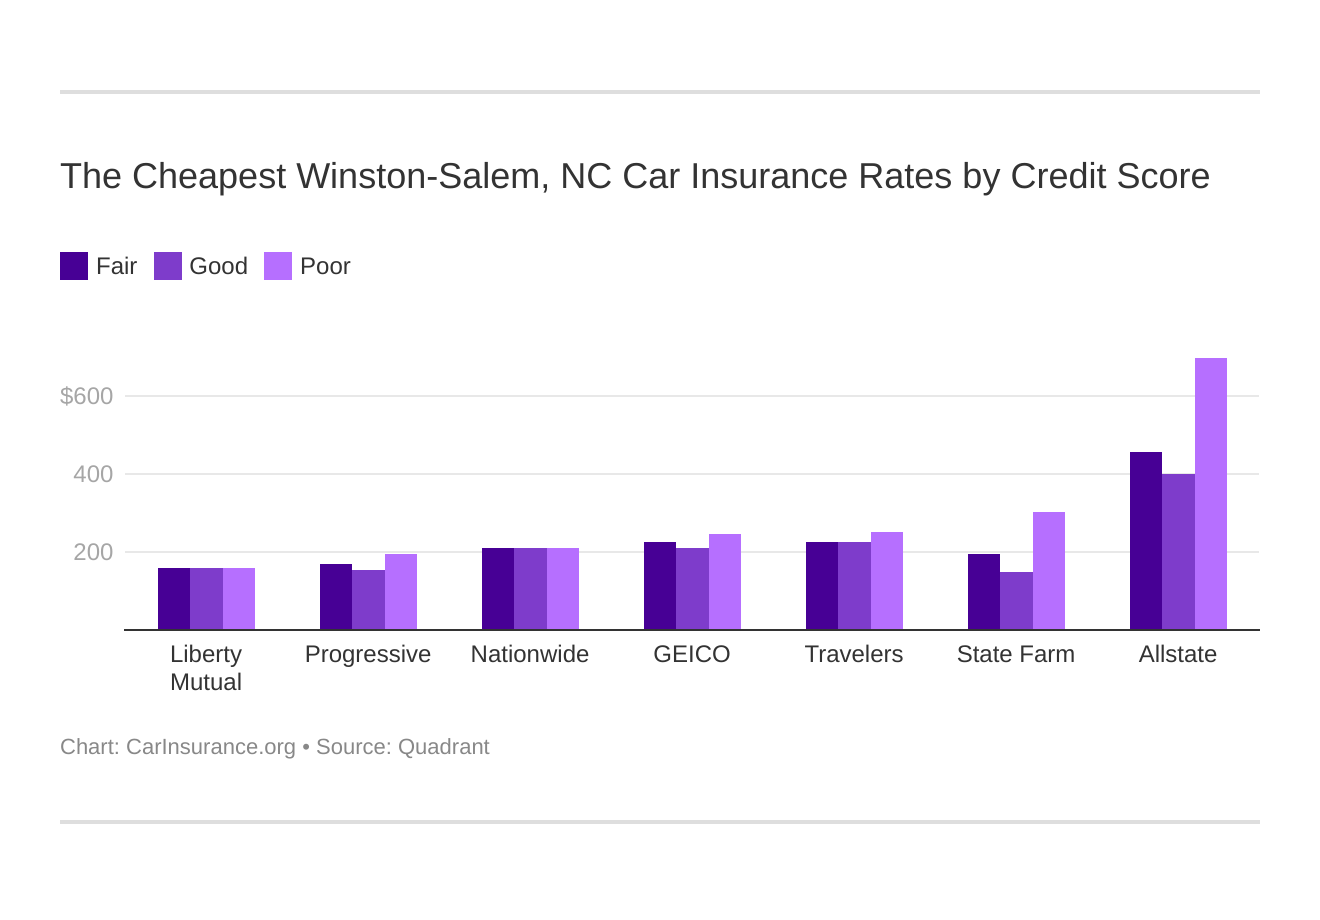 The Cheapest Winston-Salem, NC Car Insurance Rates by Credit Score